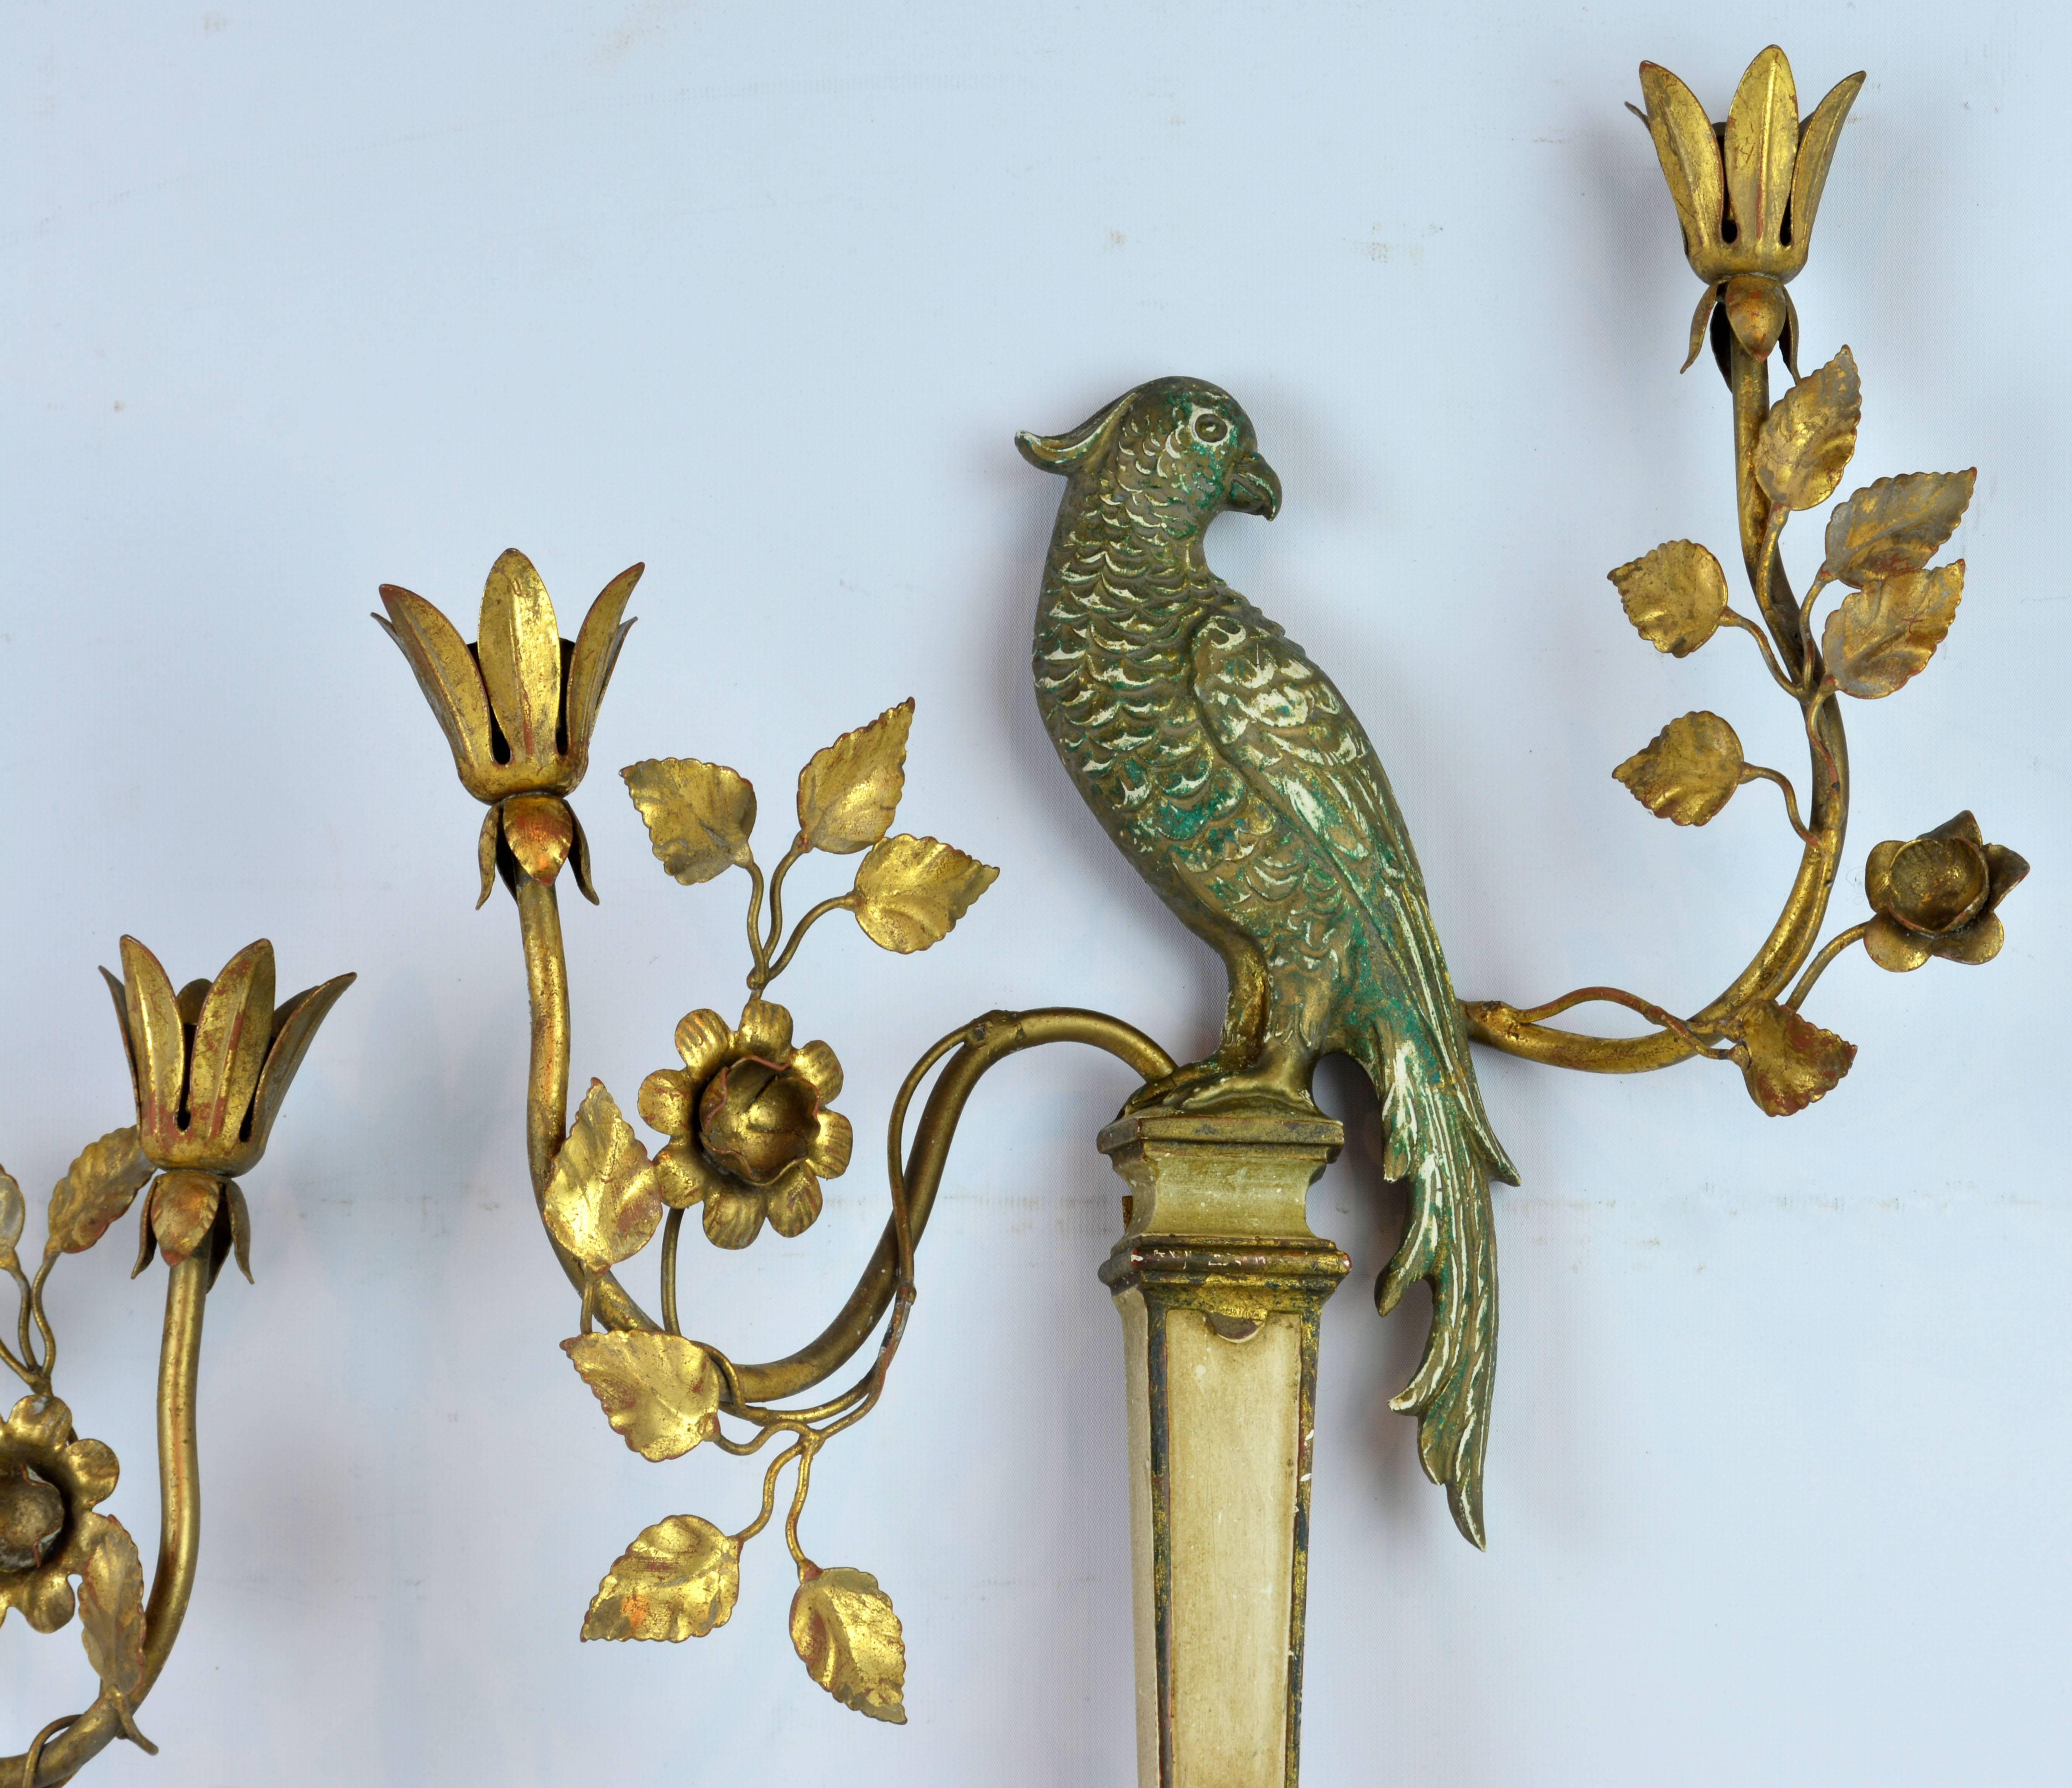 These wonderful wall sconces in the style of Napoleon III feature carved parrots perched atop classical tapered 'stems' from which naturally curved gilt bronze arms with foliage and flowers strives upwards to carry the lights. Retaining their